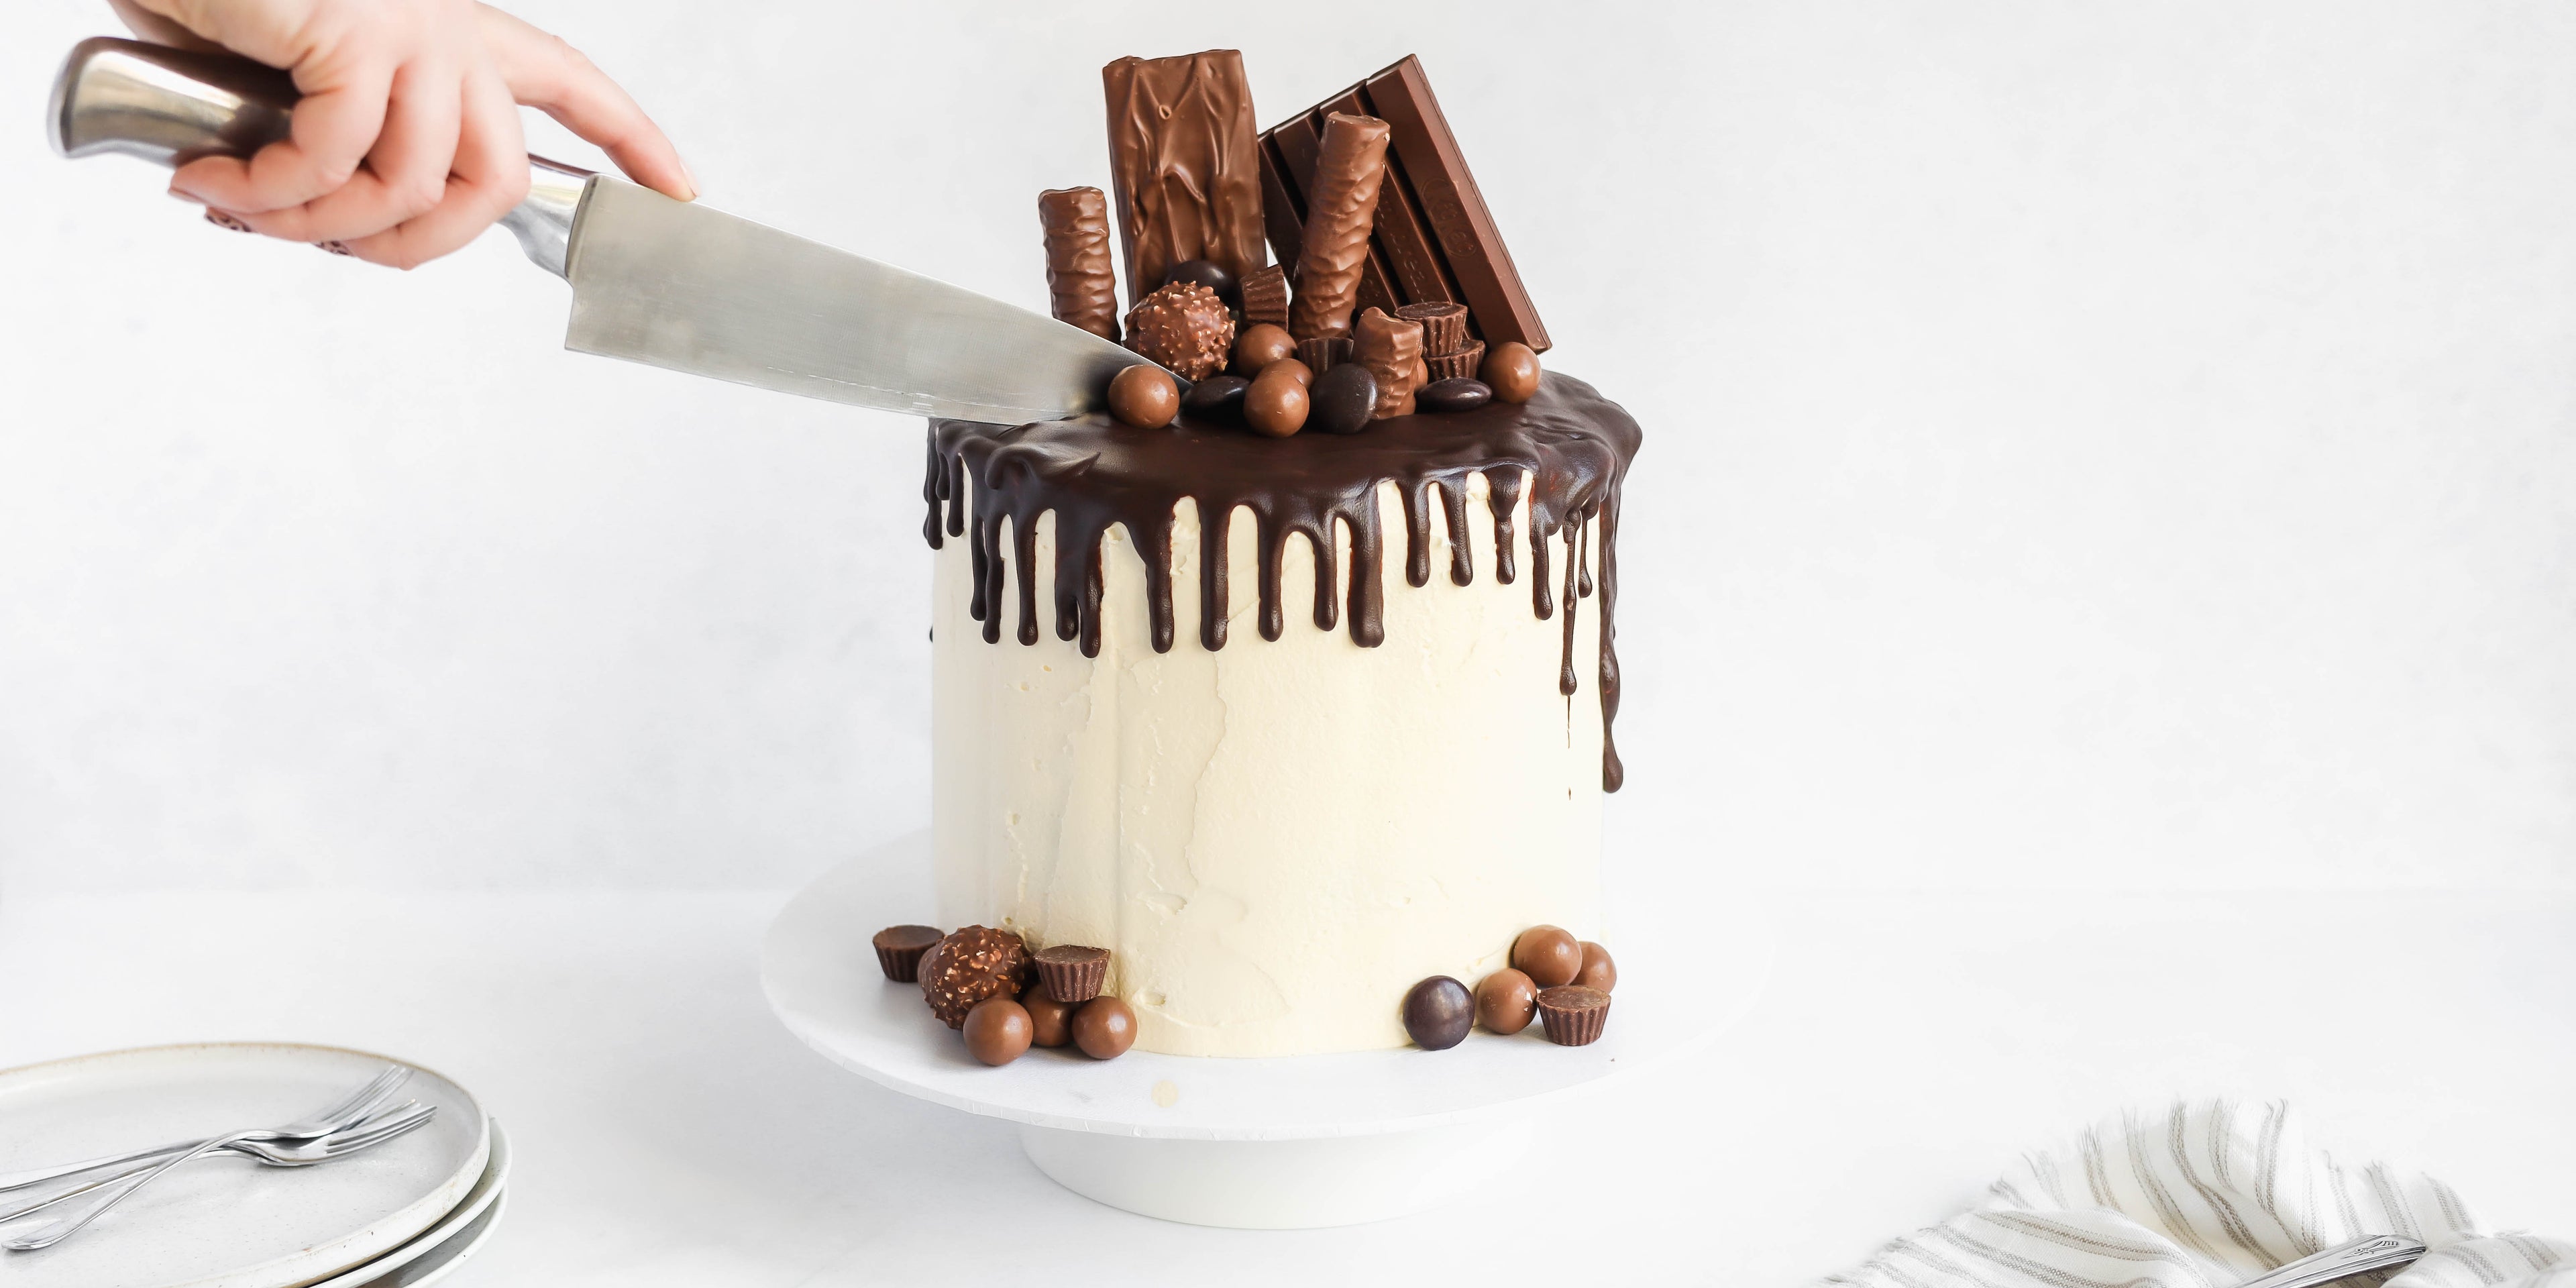 Ultimate Birthday Drip Cake with a hand reaching to slice into the cake with a knife. Topped with chocolate goodies